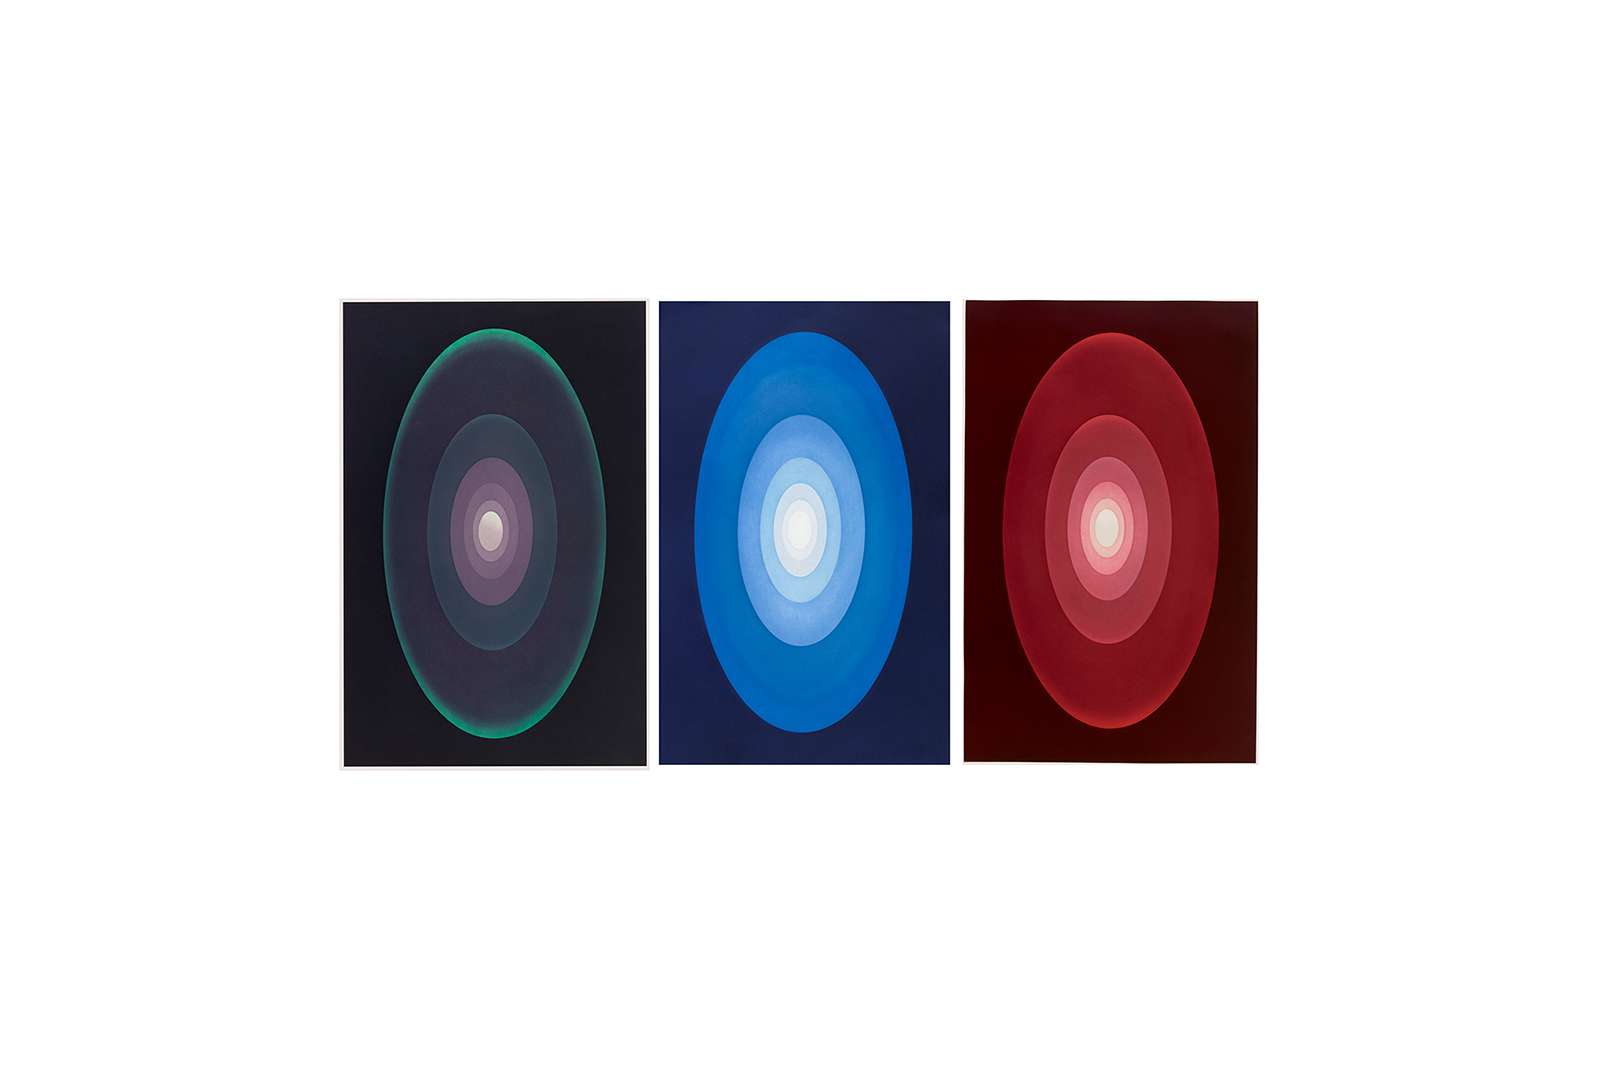 James Turrell, Suite from Aten Reign, 2014. Suite of three aquatints. 34 3/4 x 22 inches each. Edition of 30. 